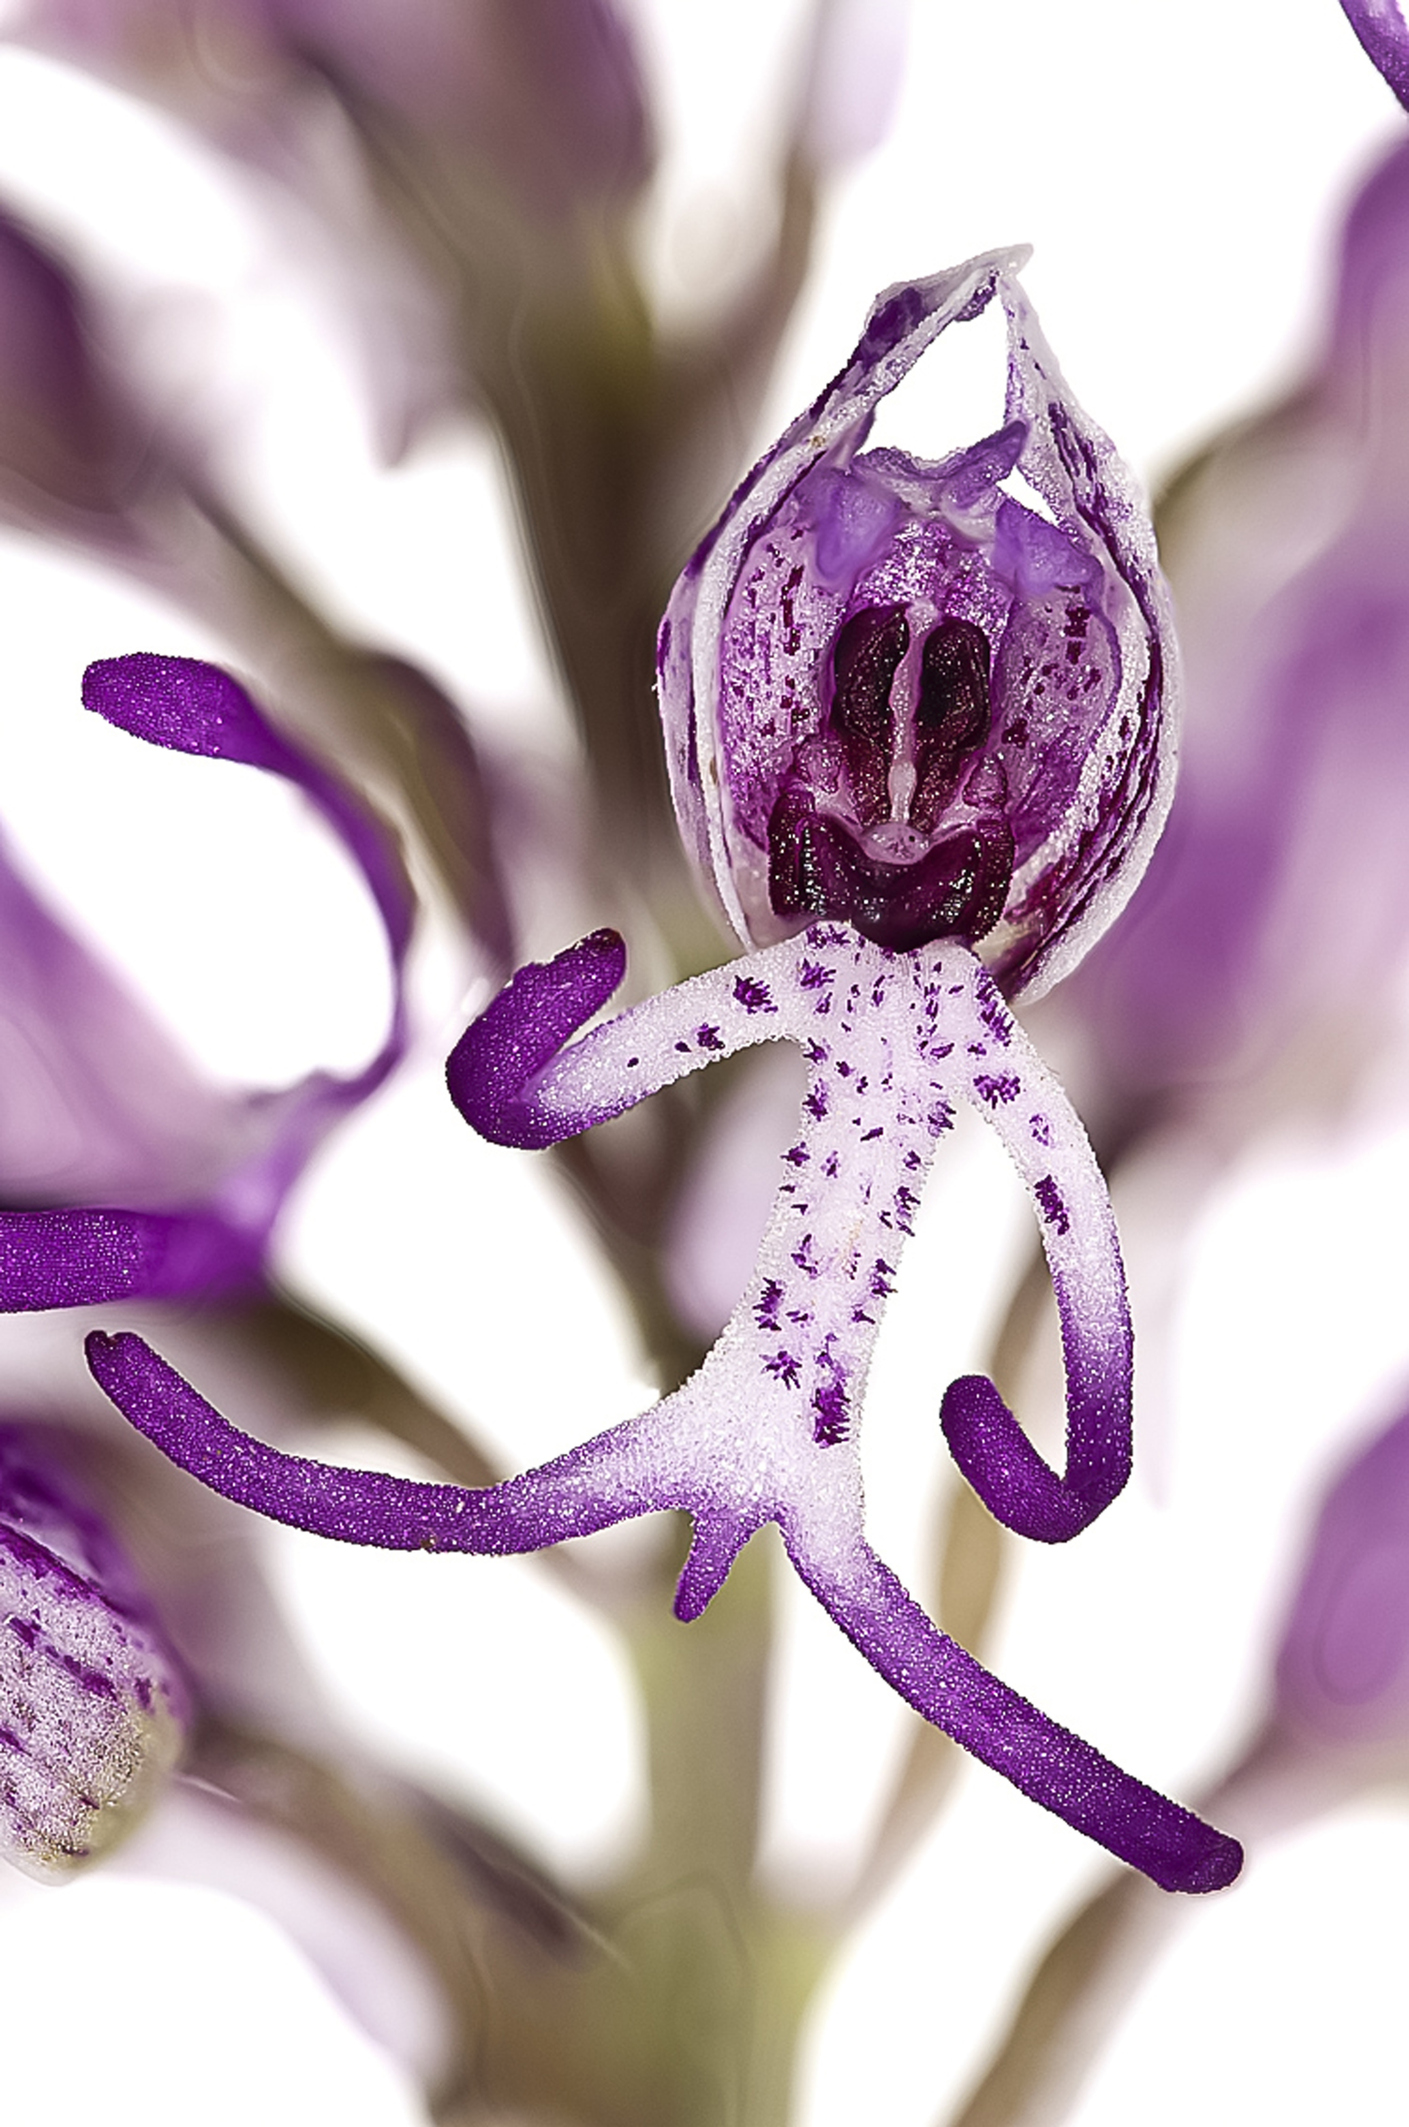 Flowers: The monkey orchid (Orchis simia) is widespread in central and southern Europe.